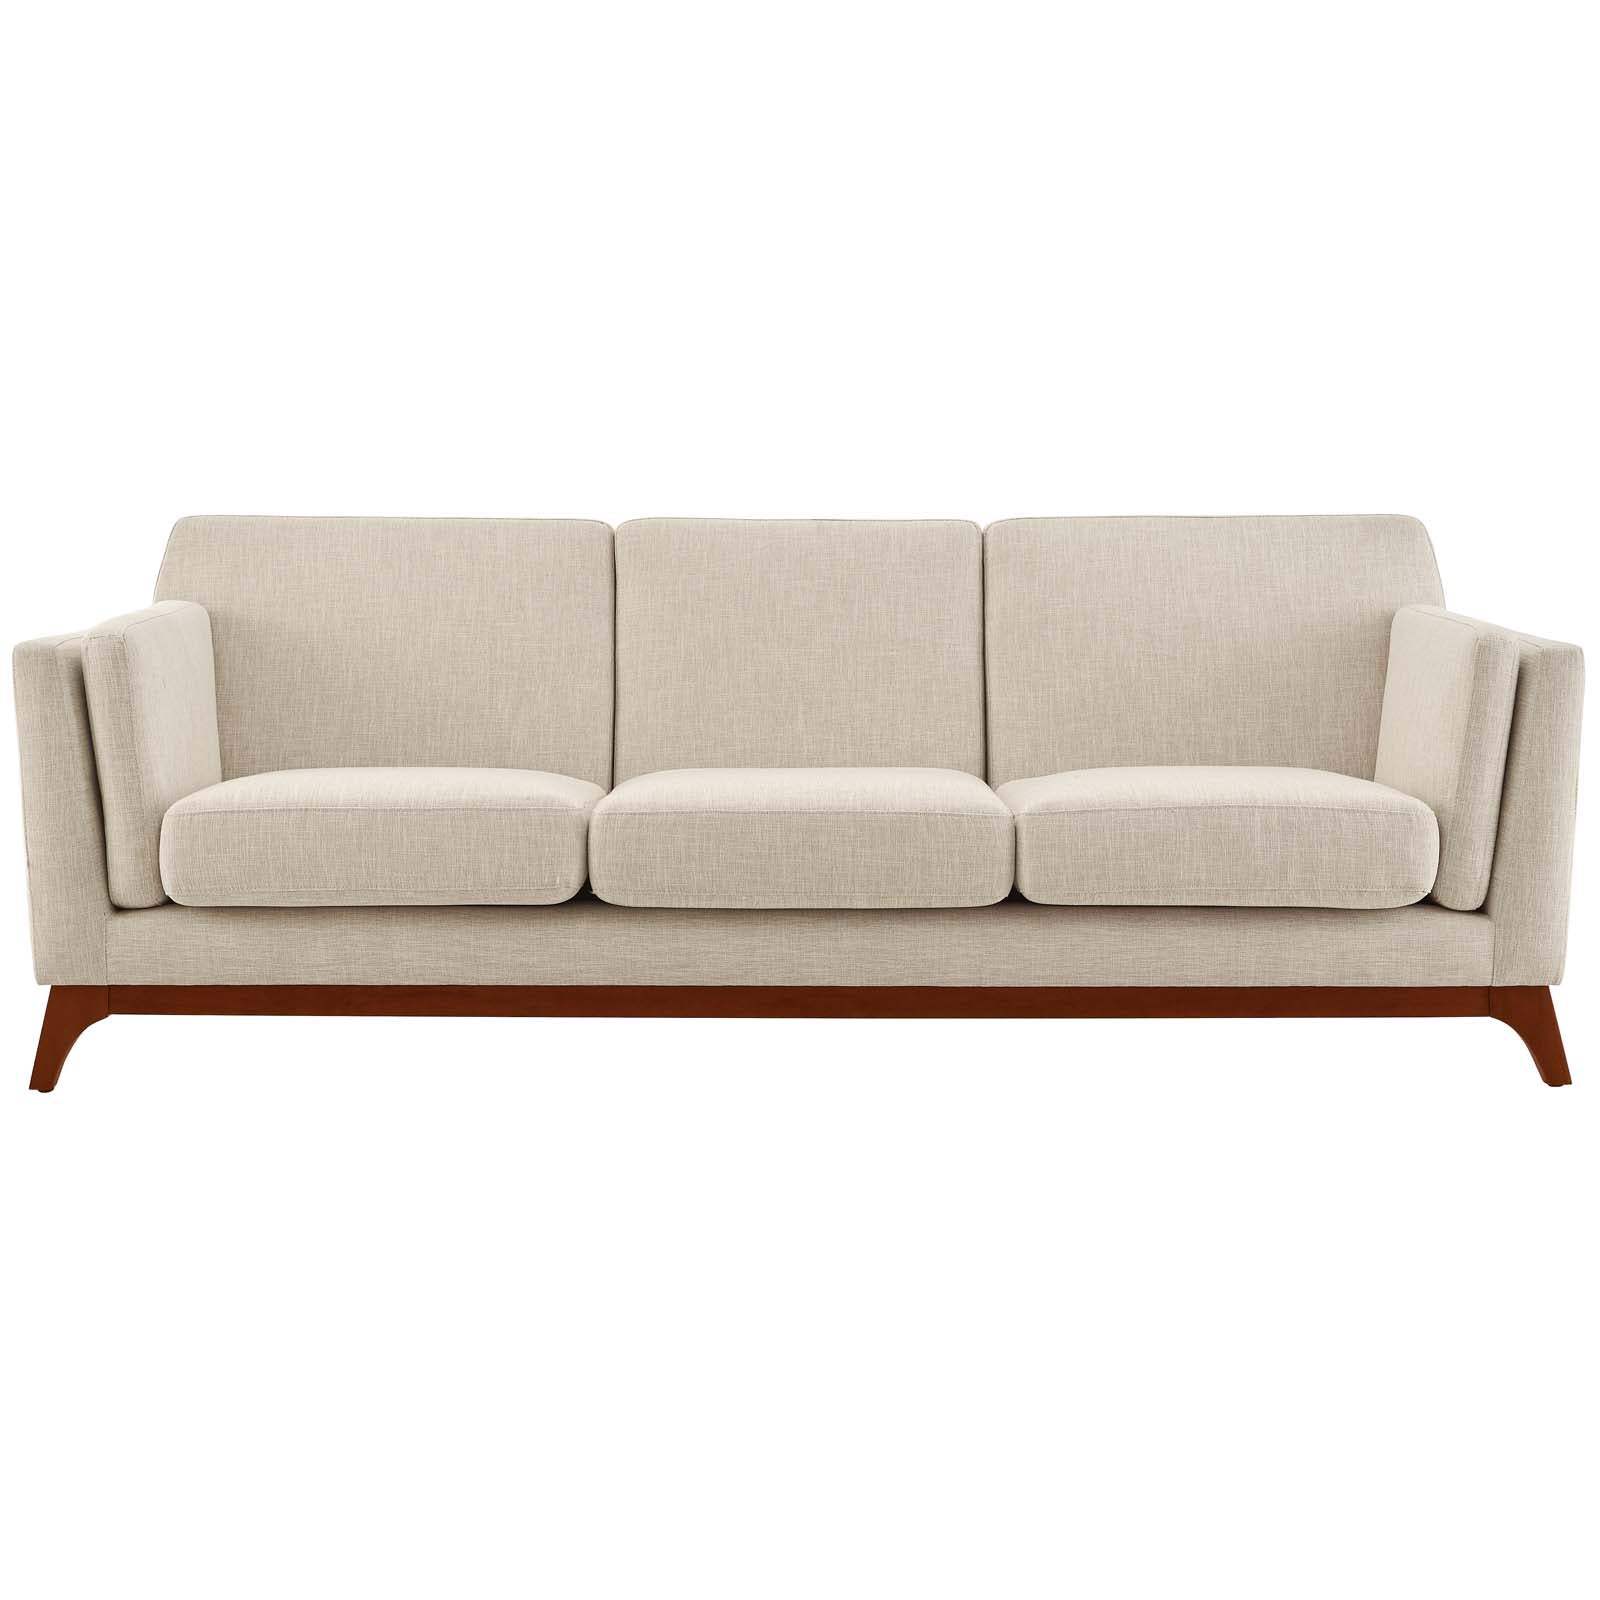 Modway Sofas & Couches - Chance Upholstered Fabric Sofa Beige